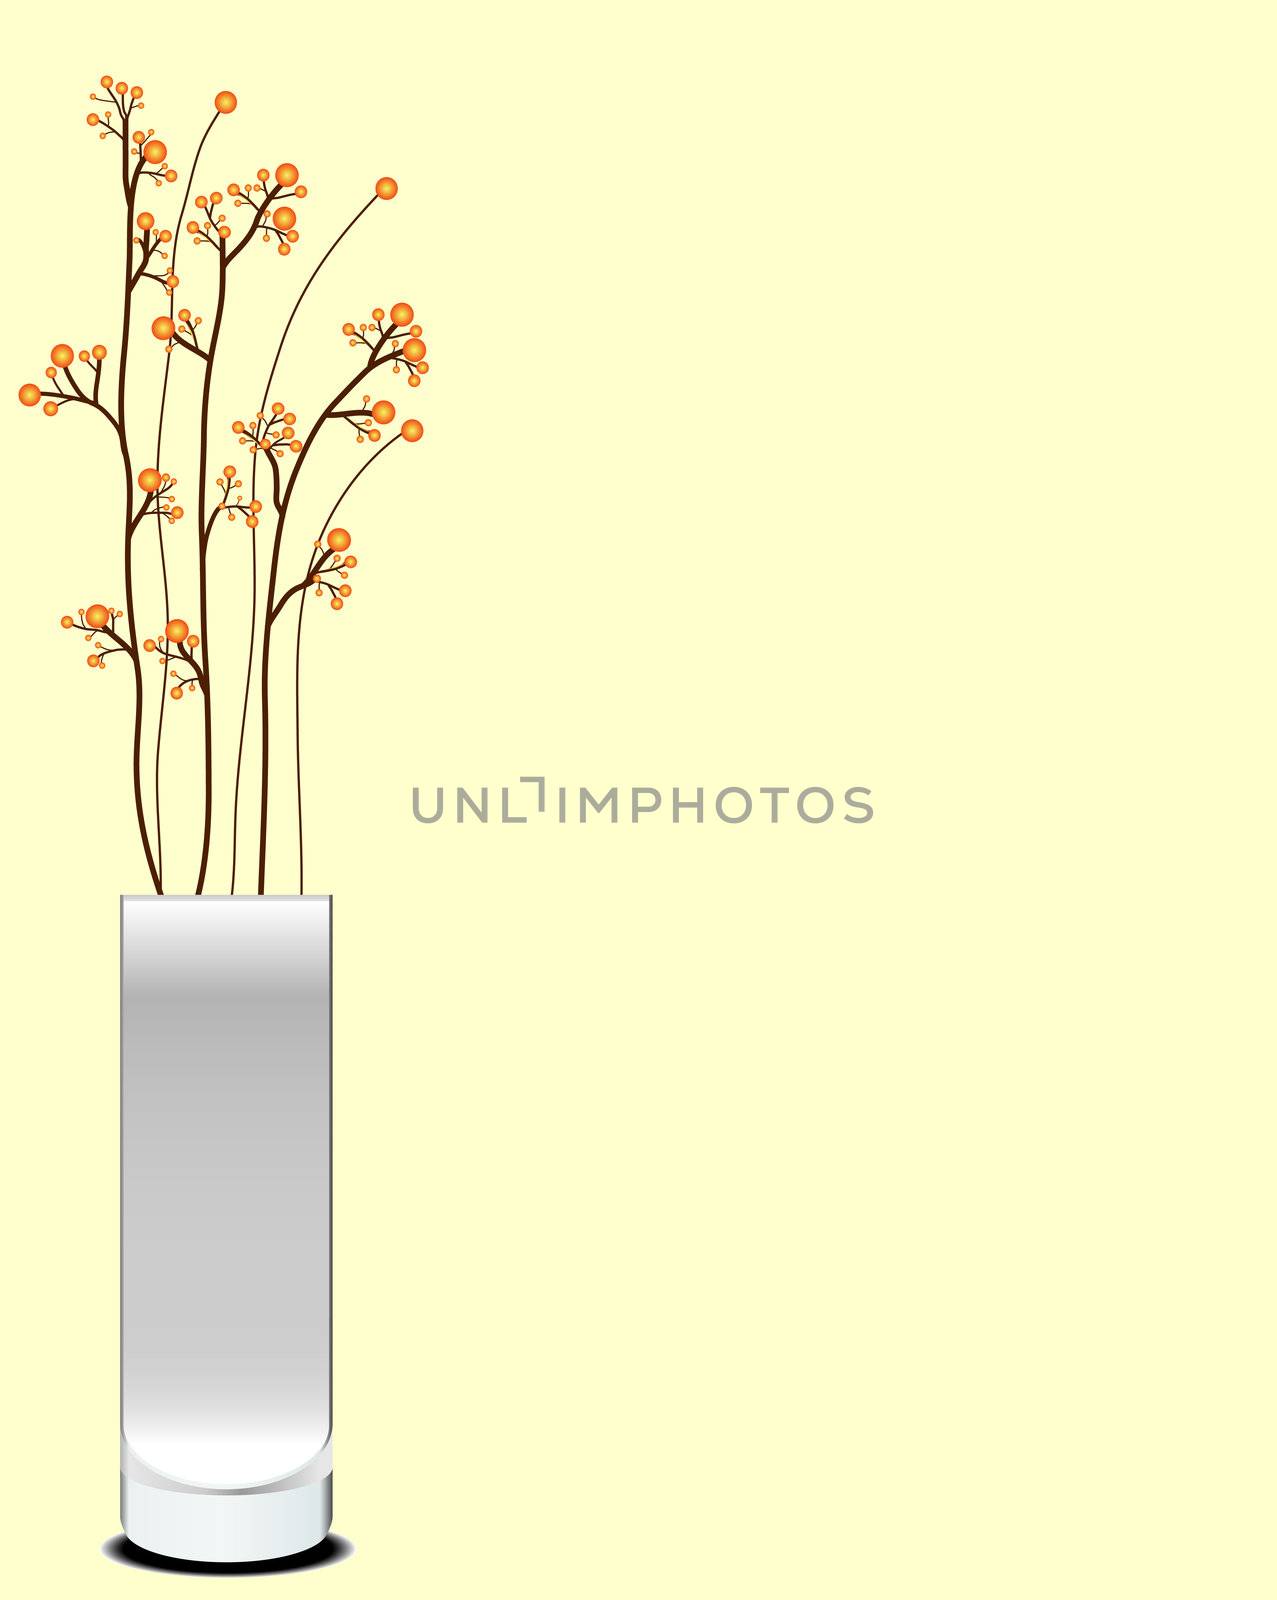 beautiful flowers in a vase by peromarketing